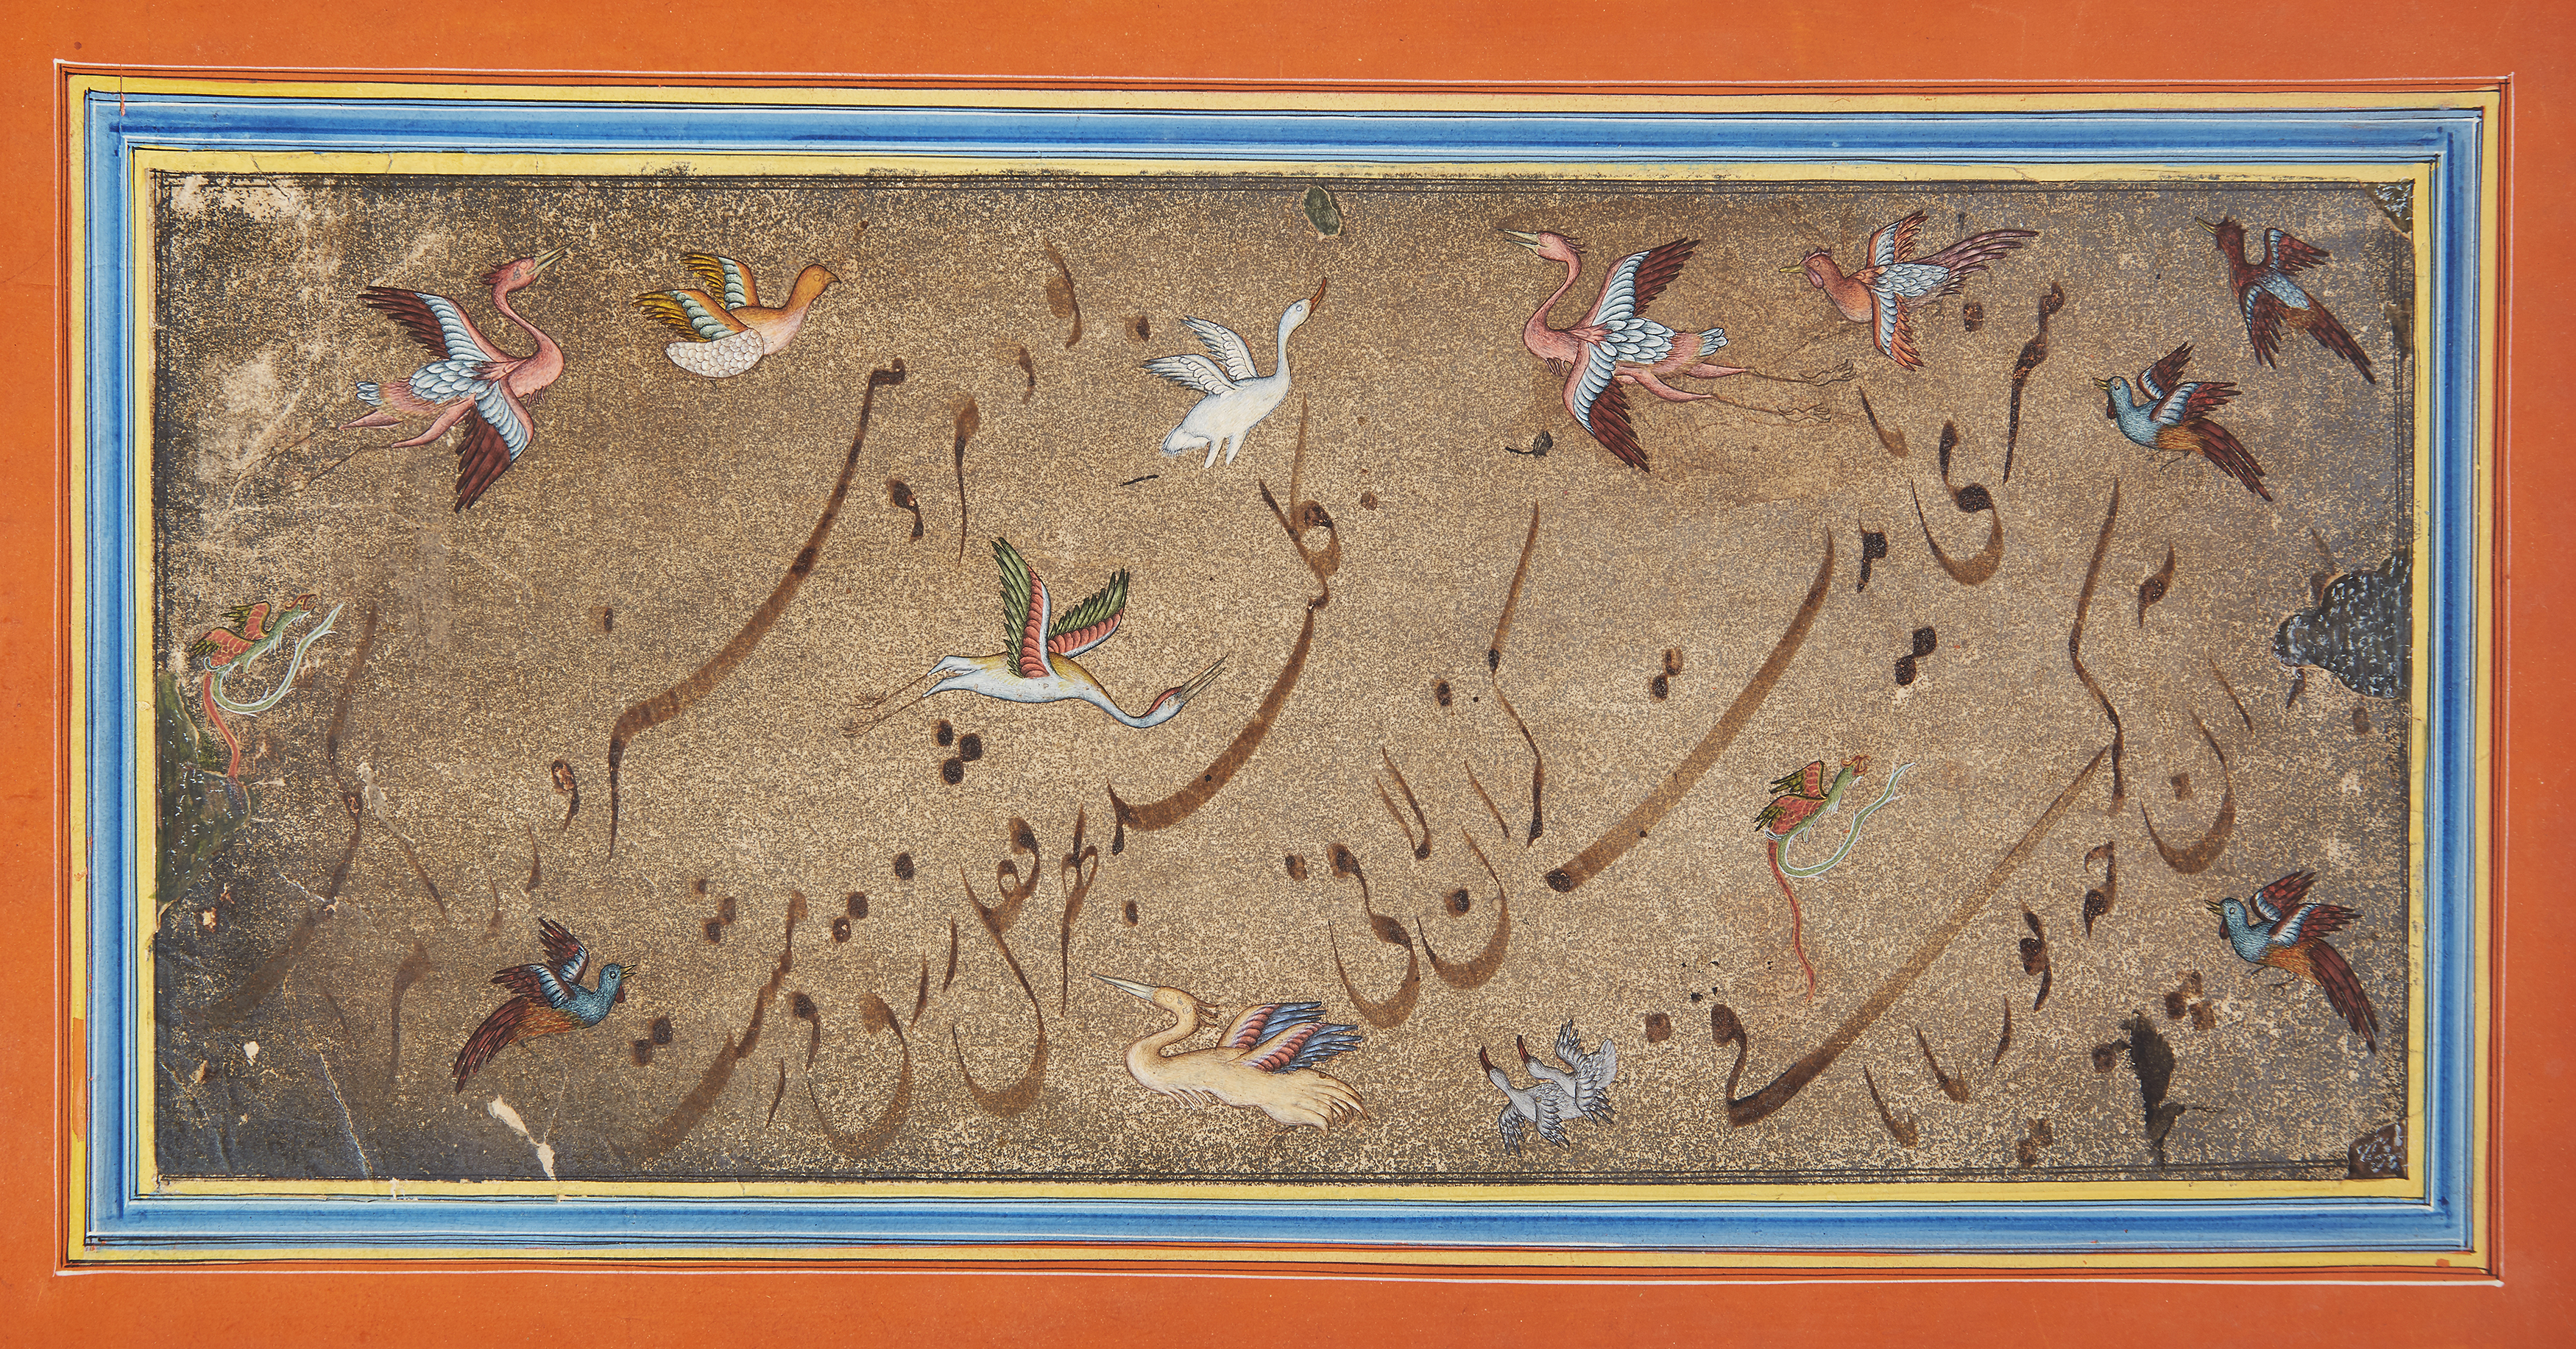 Property from An Important Private Collection Six calligraphic panels, Qajar Iran, 19th century... - Image 5 of 6